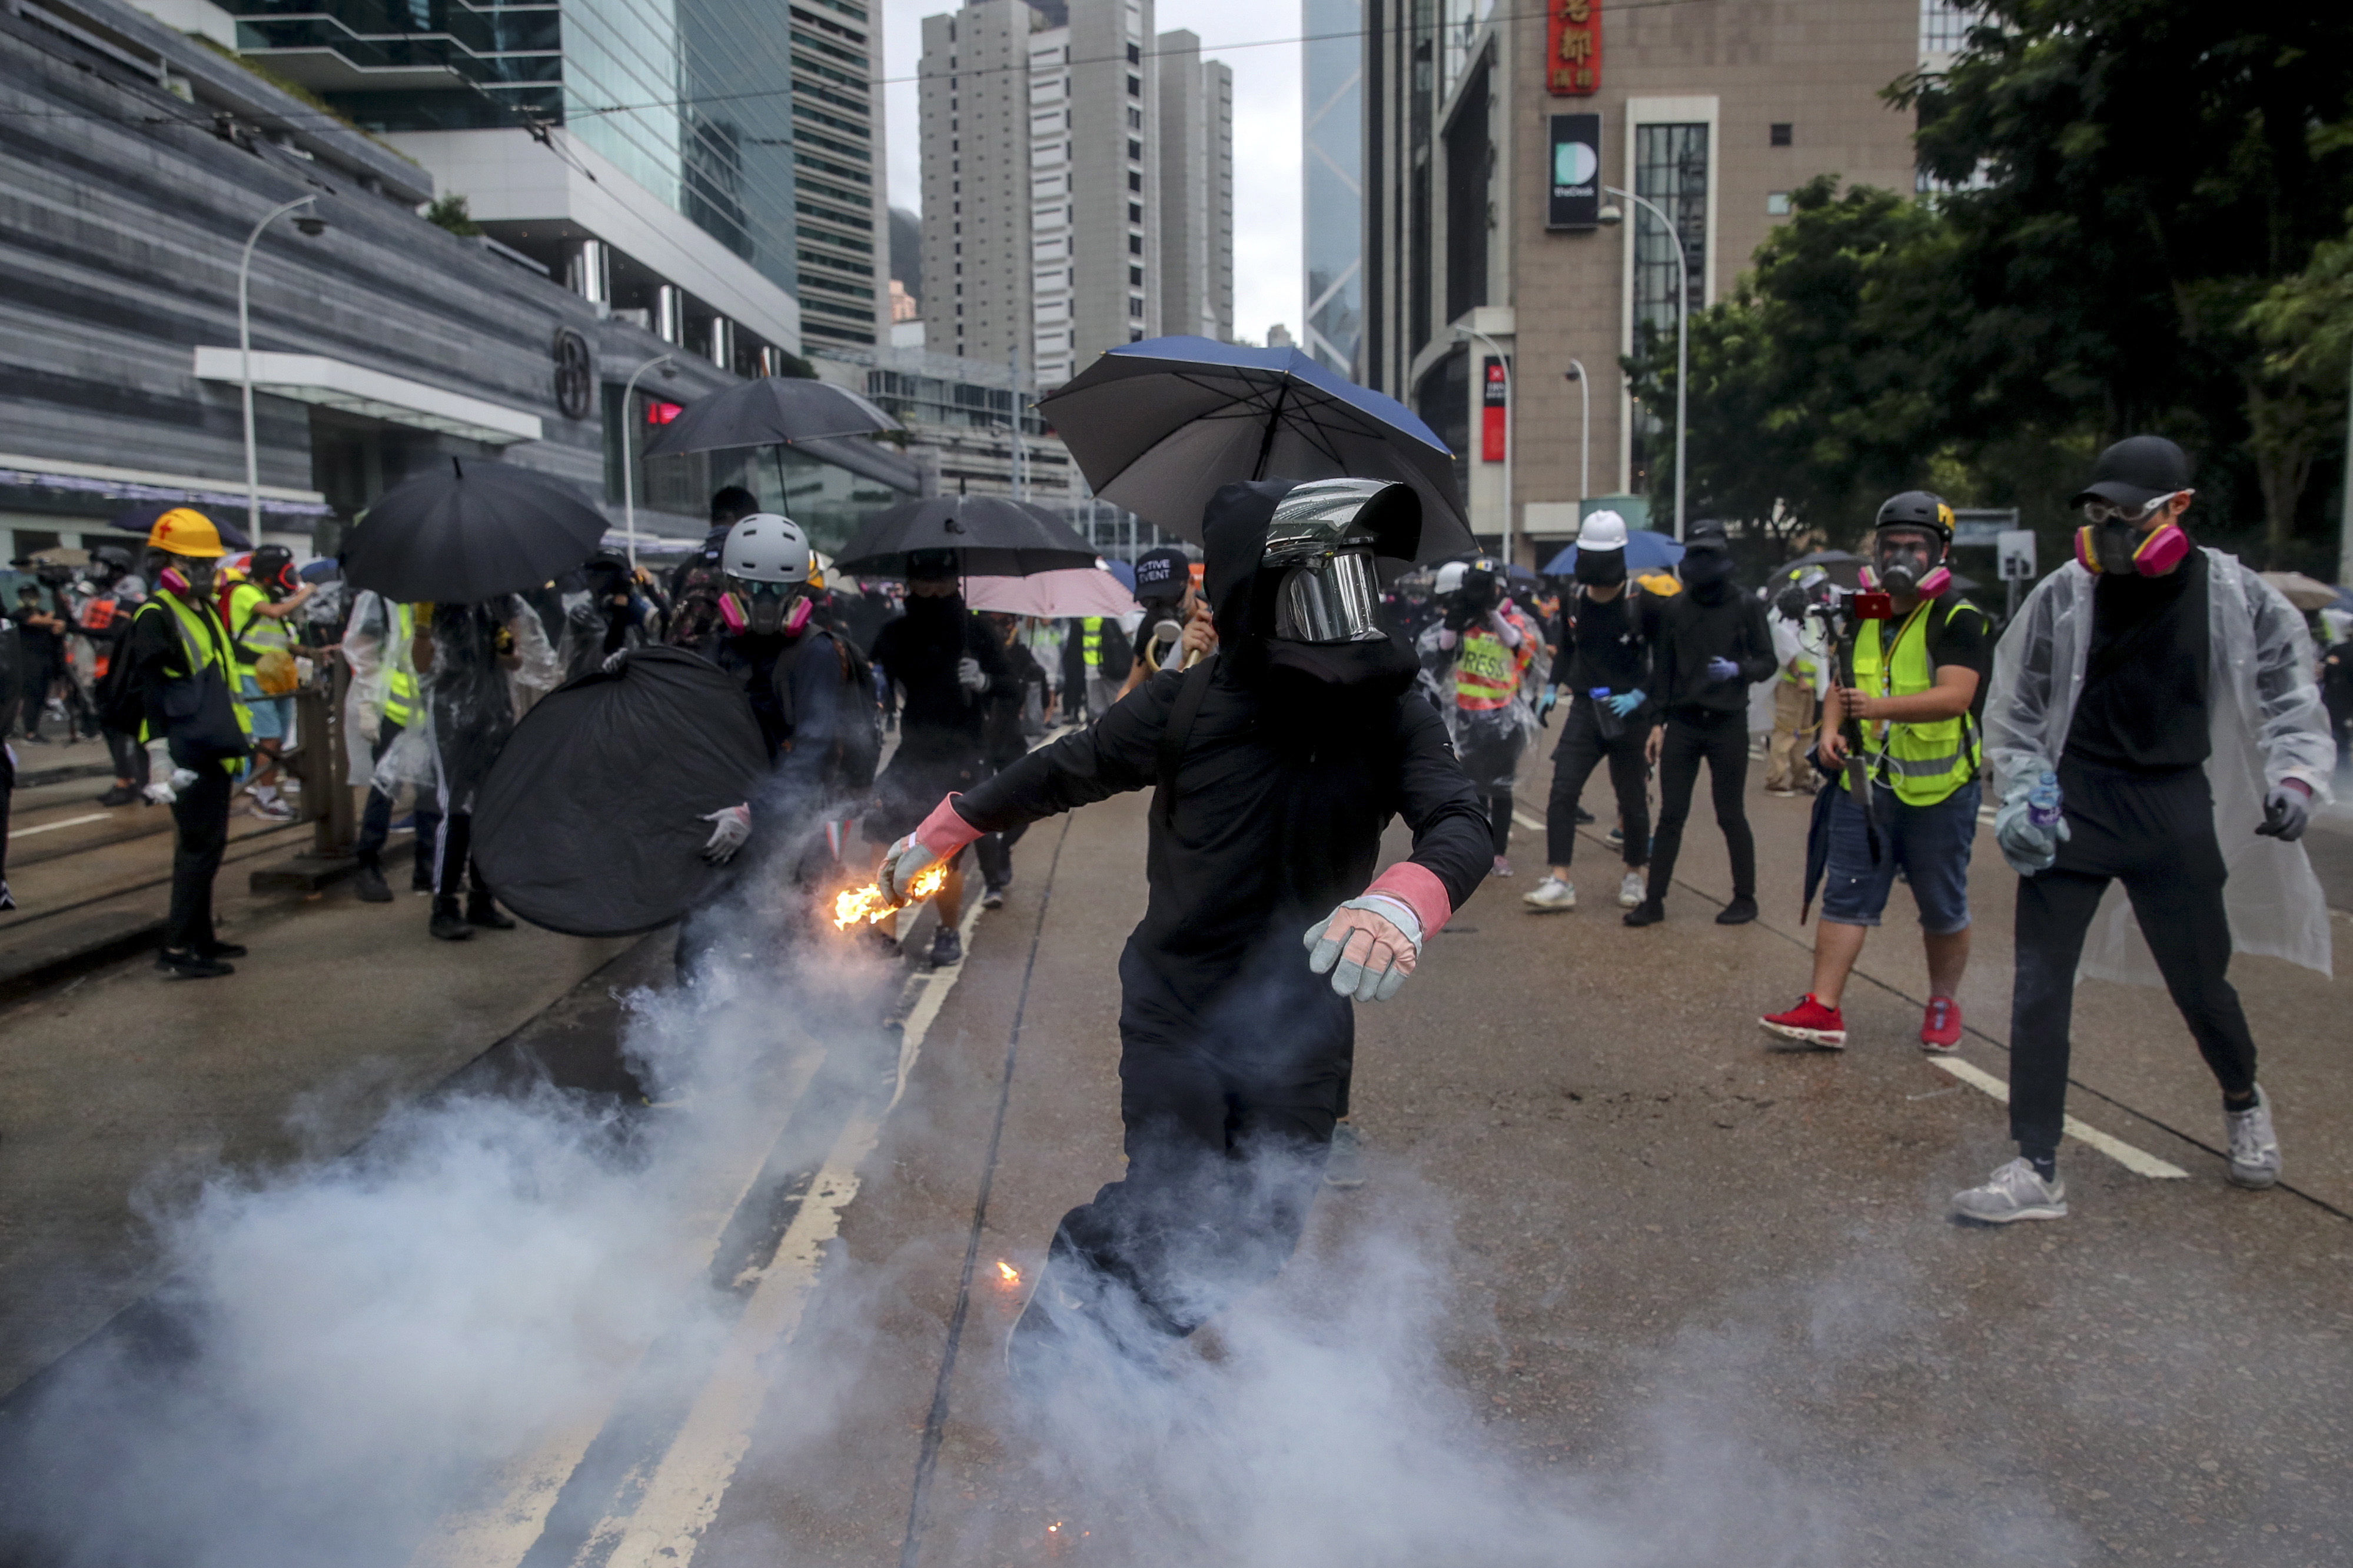 epa07900476 A protester prepares to throw a flaming projectile during an Anti-ERO (Emergency Regulations Ordinance) demonstration against a newly imposed law banning face masks in public in Hong Kong, China, 06 October 2019. Anti-government protesters took to the streets against the government's use of emergency powers to ban face masks in public in a bid to end the city's protests. Hong Kong has been gripped by mass demonstrations since June over a now-withdrawn extradition bill, which have since morphed into a wider anti-government movement.  EPA/FAZRY ISMAIL